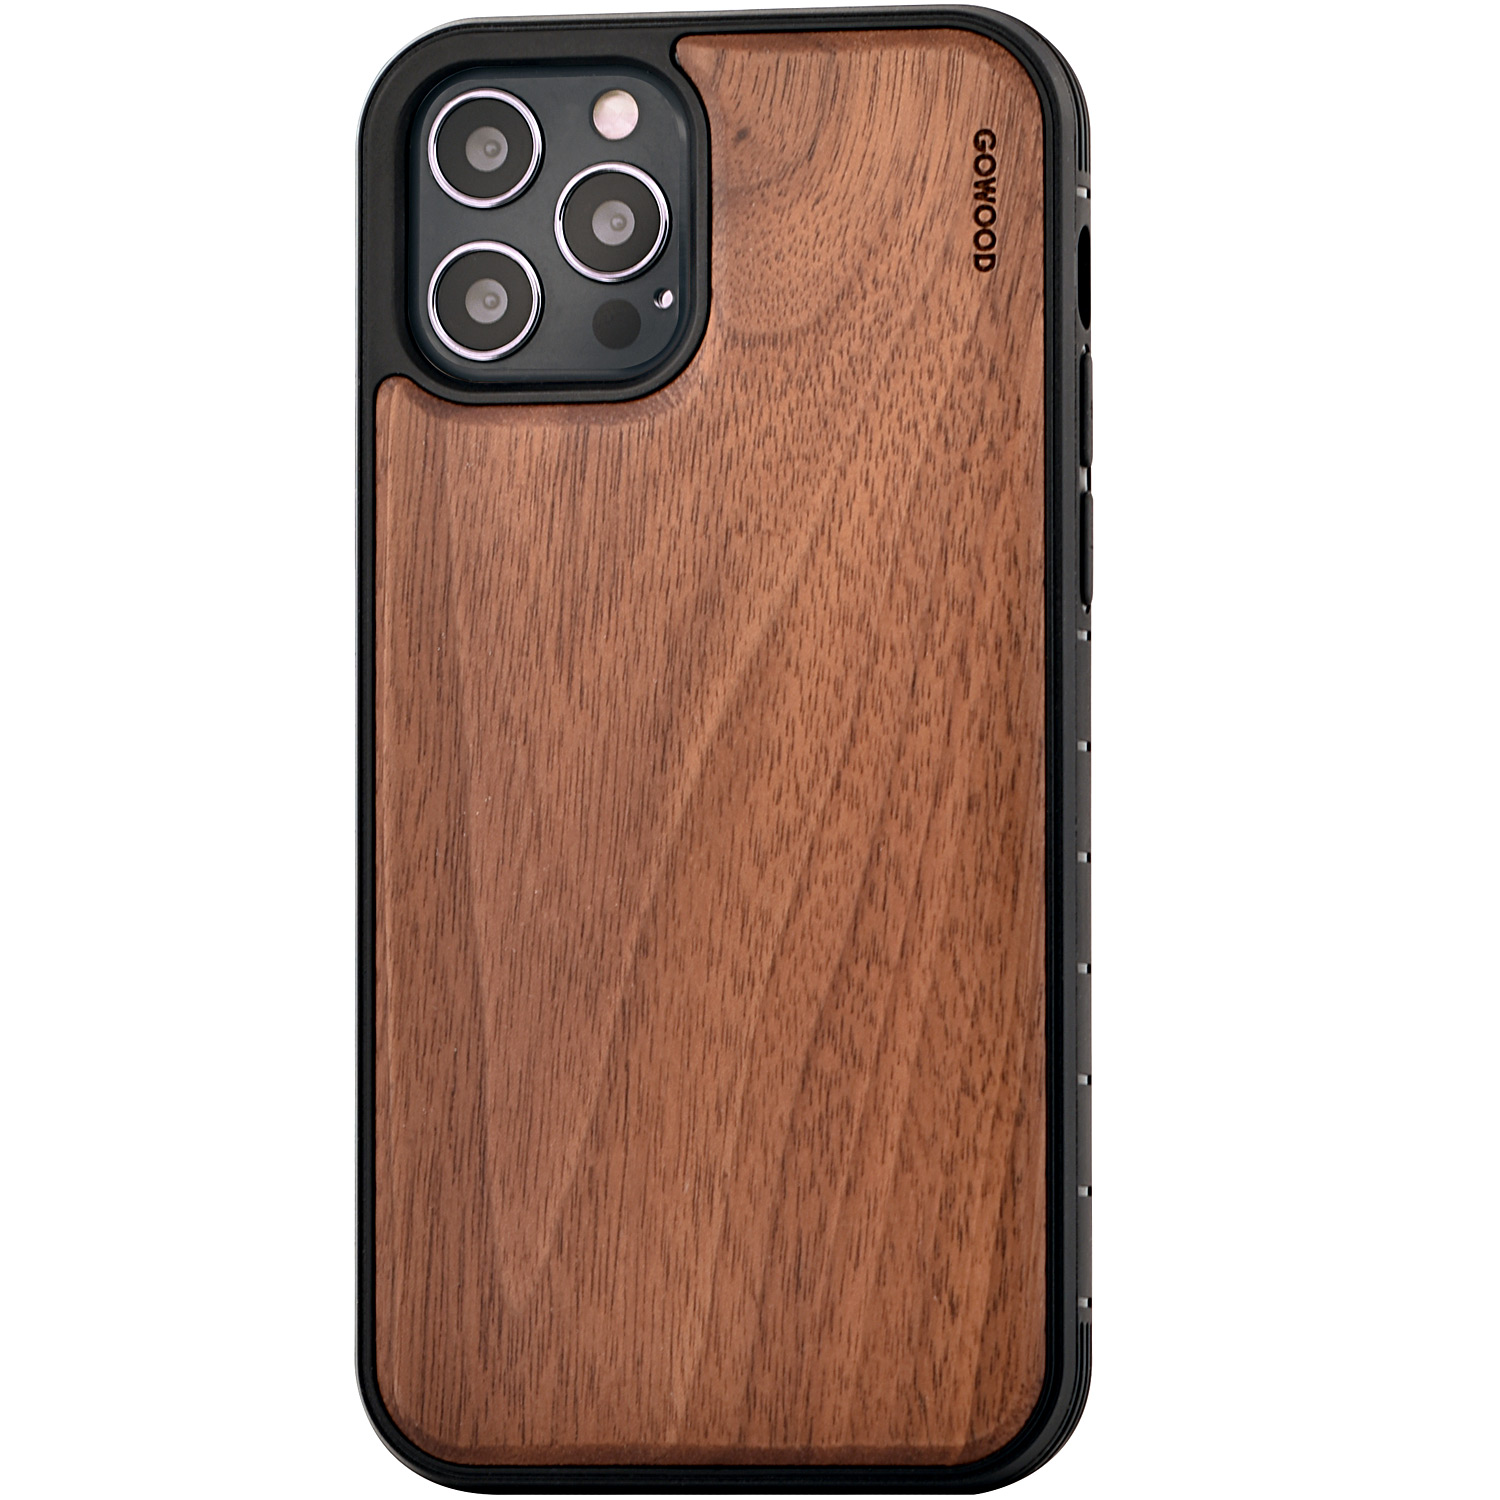 iPhone 12 and iPhone 12 Pro wood case walnut backside with TPU bumper and black PC